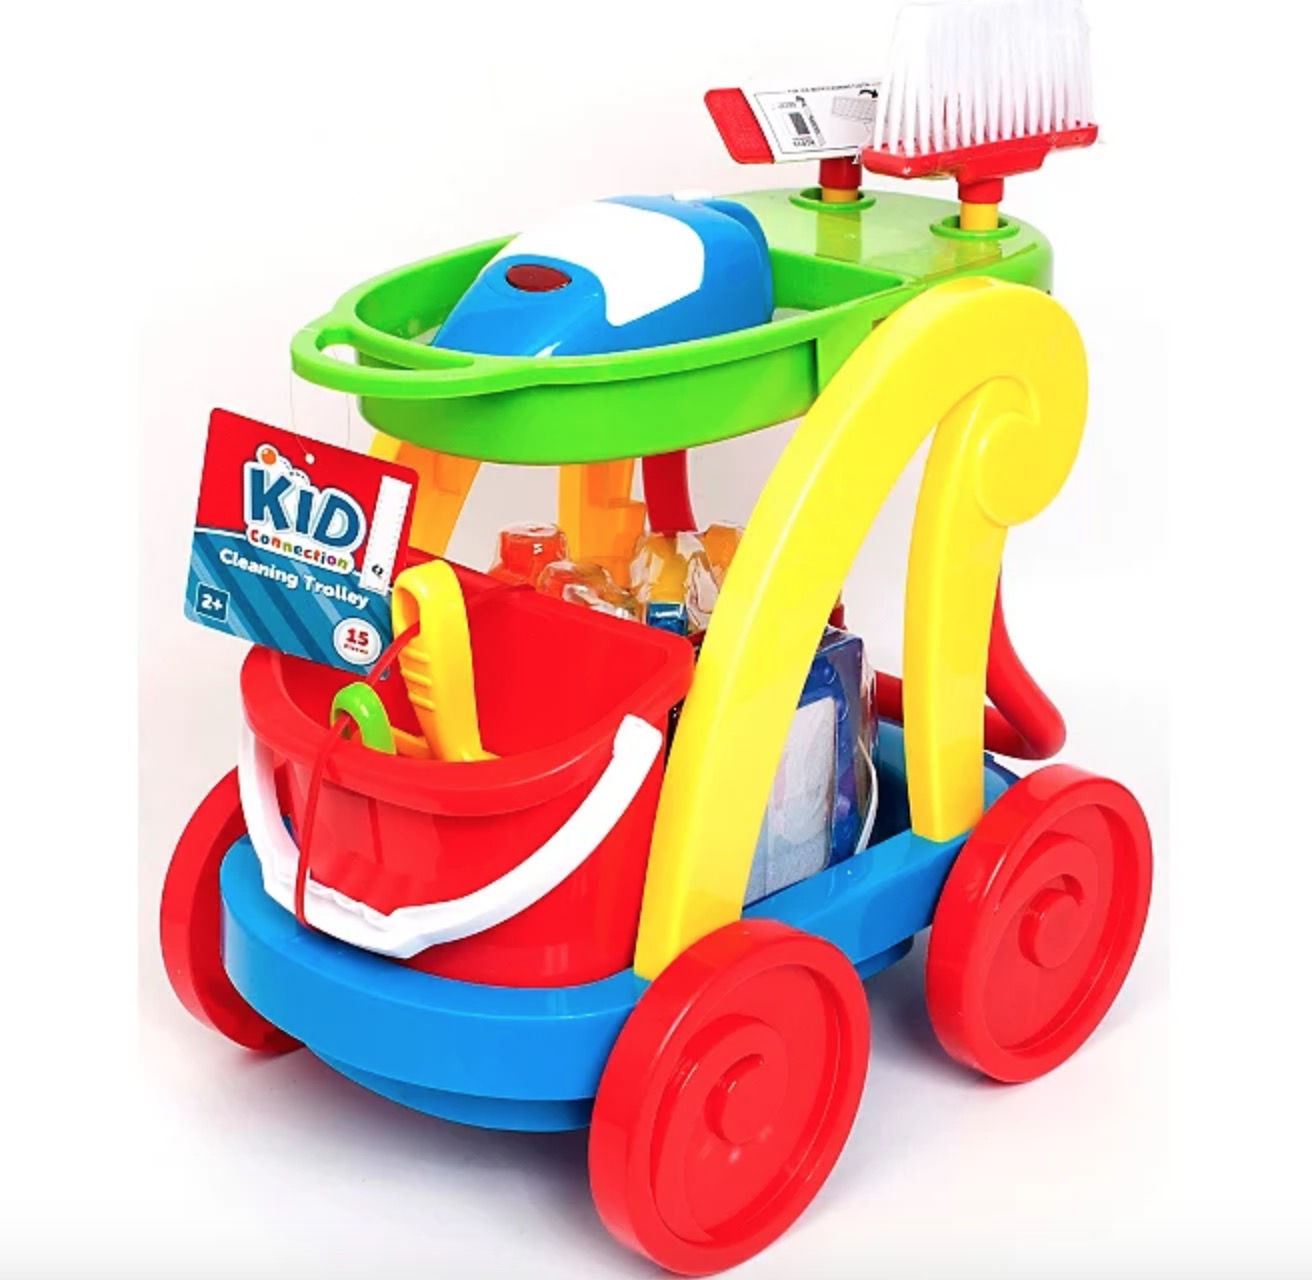 Kid Connection Cleaning Trolley Playset